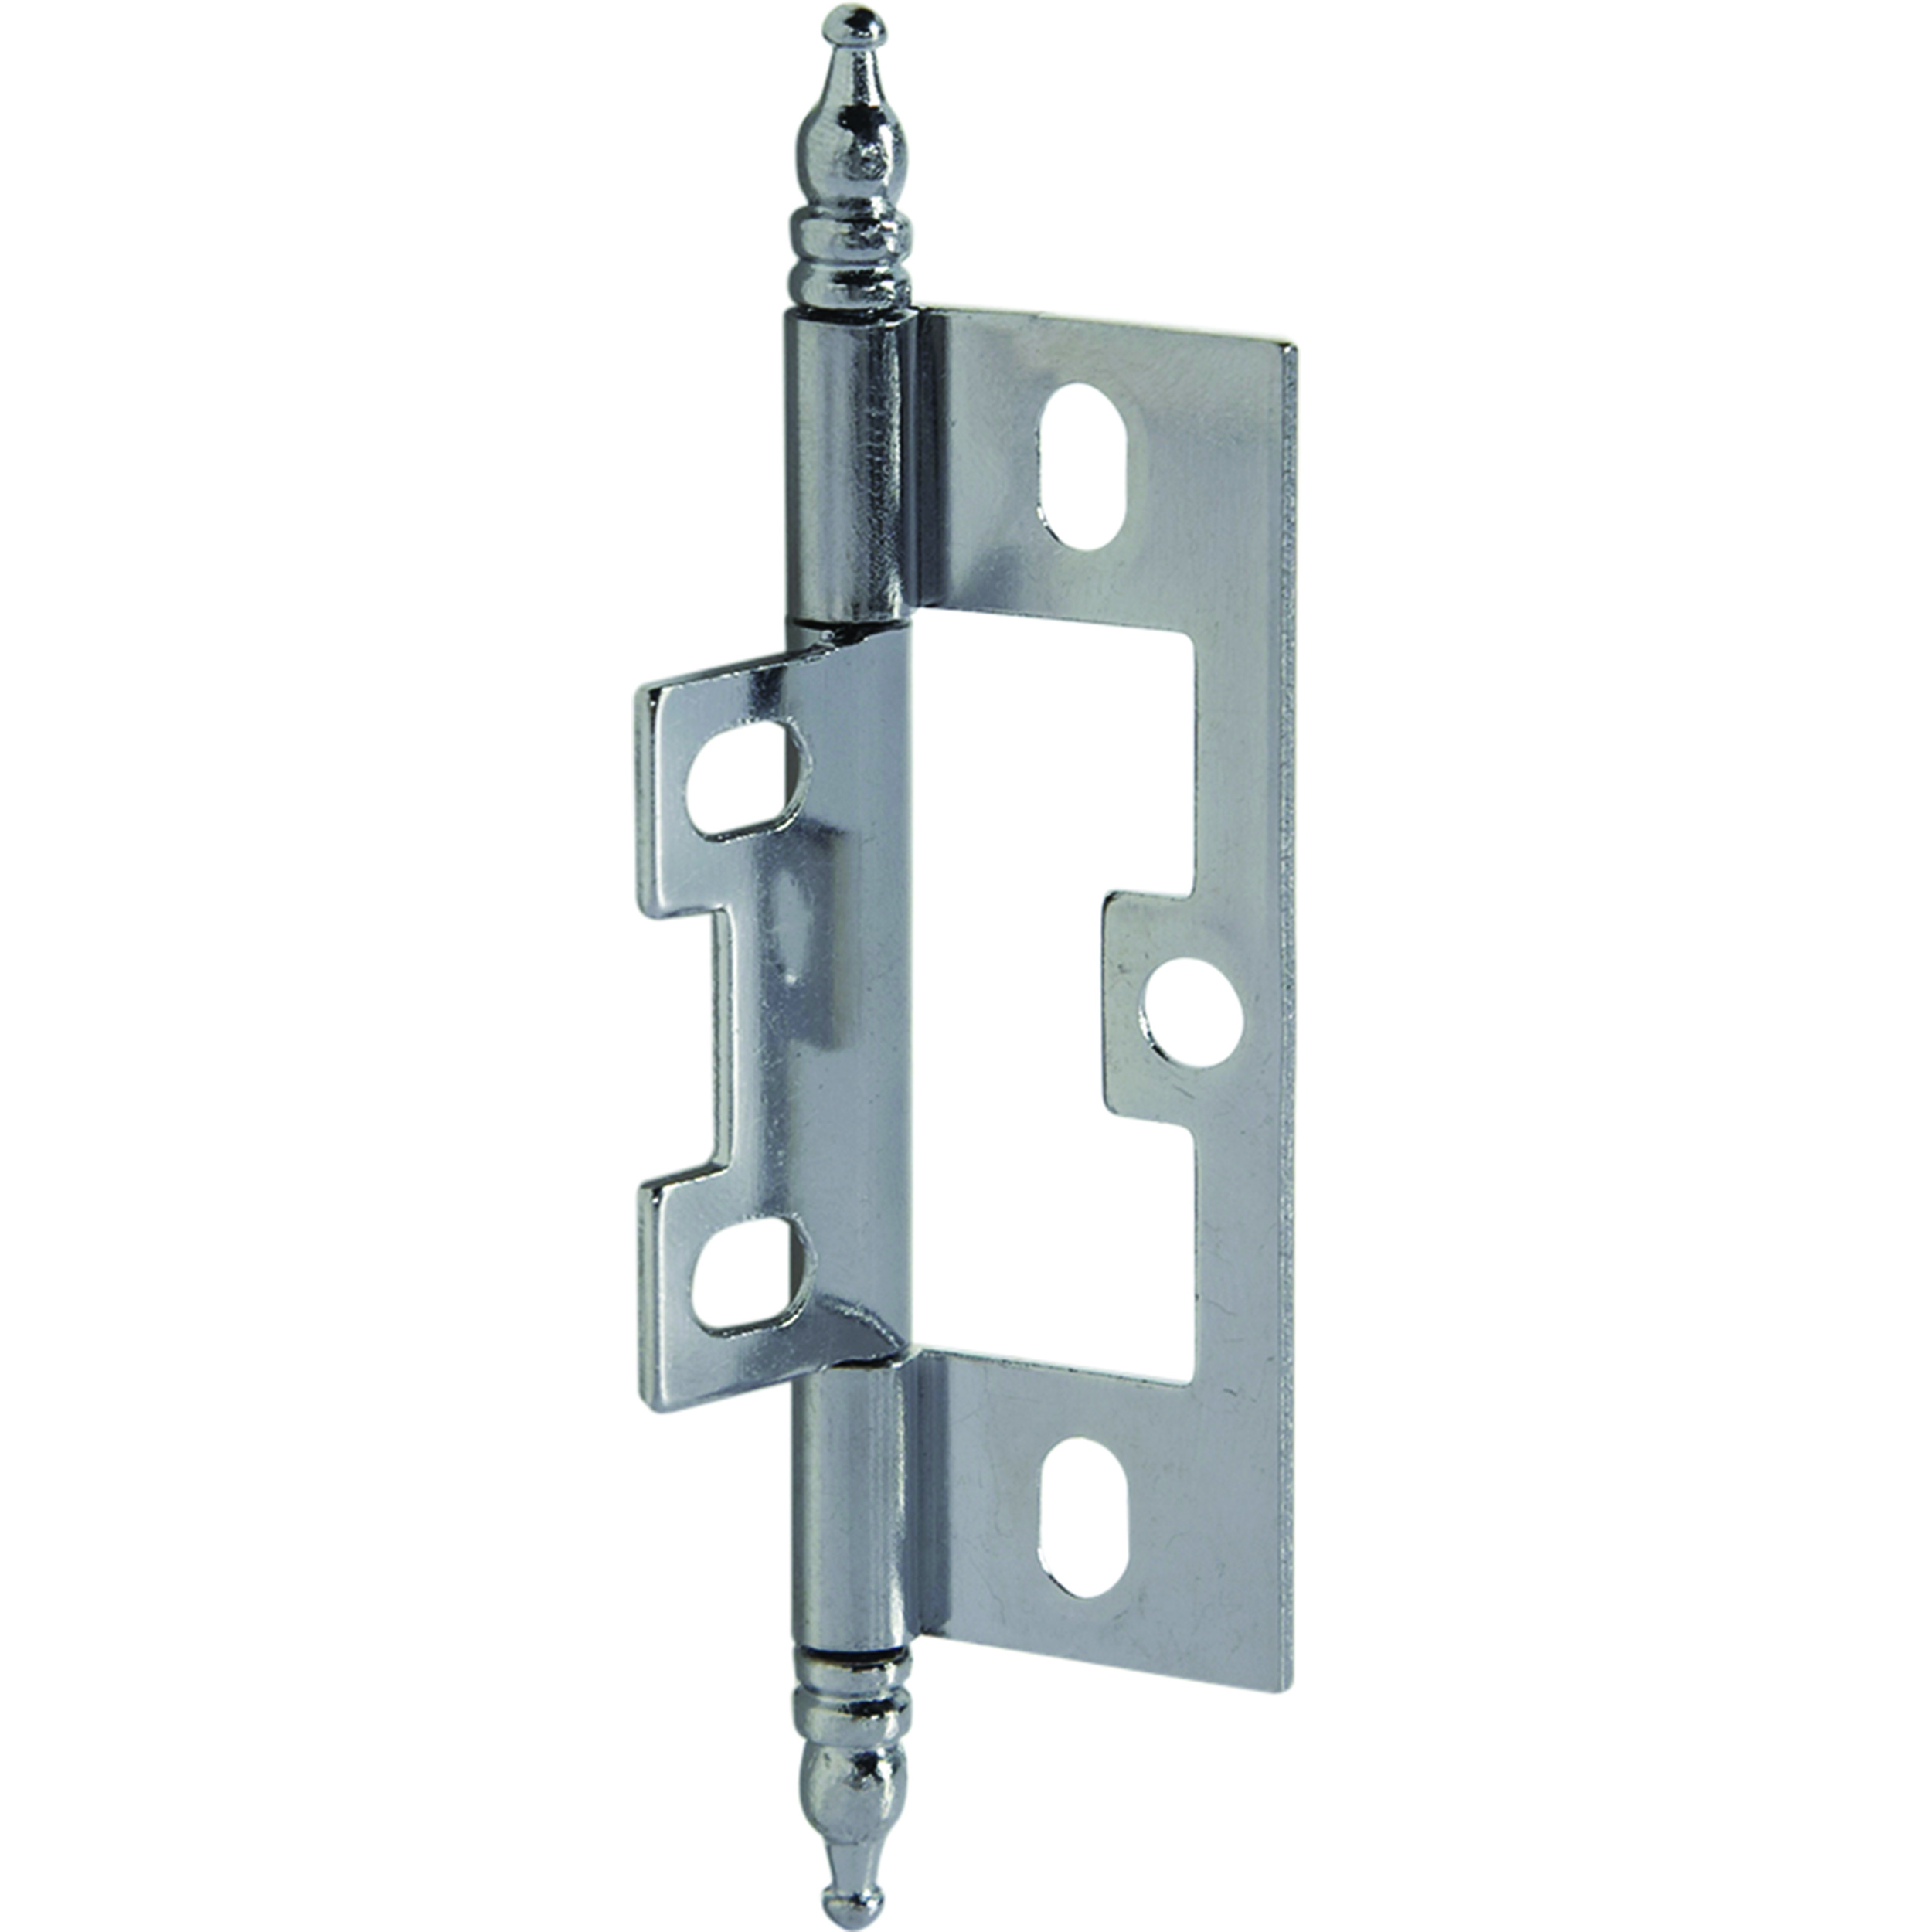 Non-mortised Decorative Butt Hinge With Finial In Chrome - Model# 351.95.270